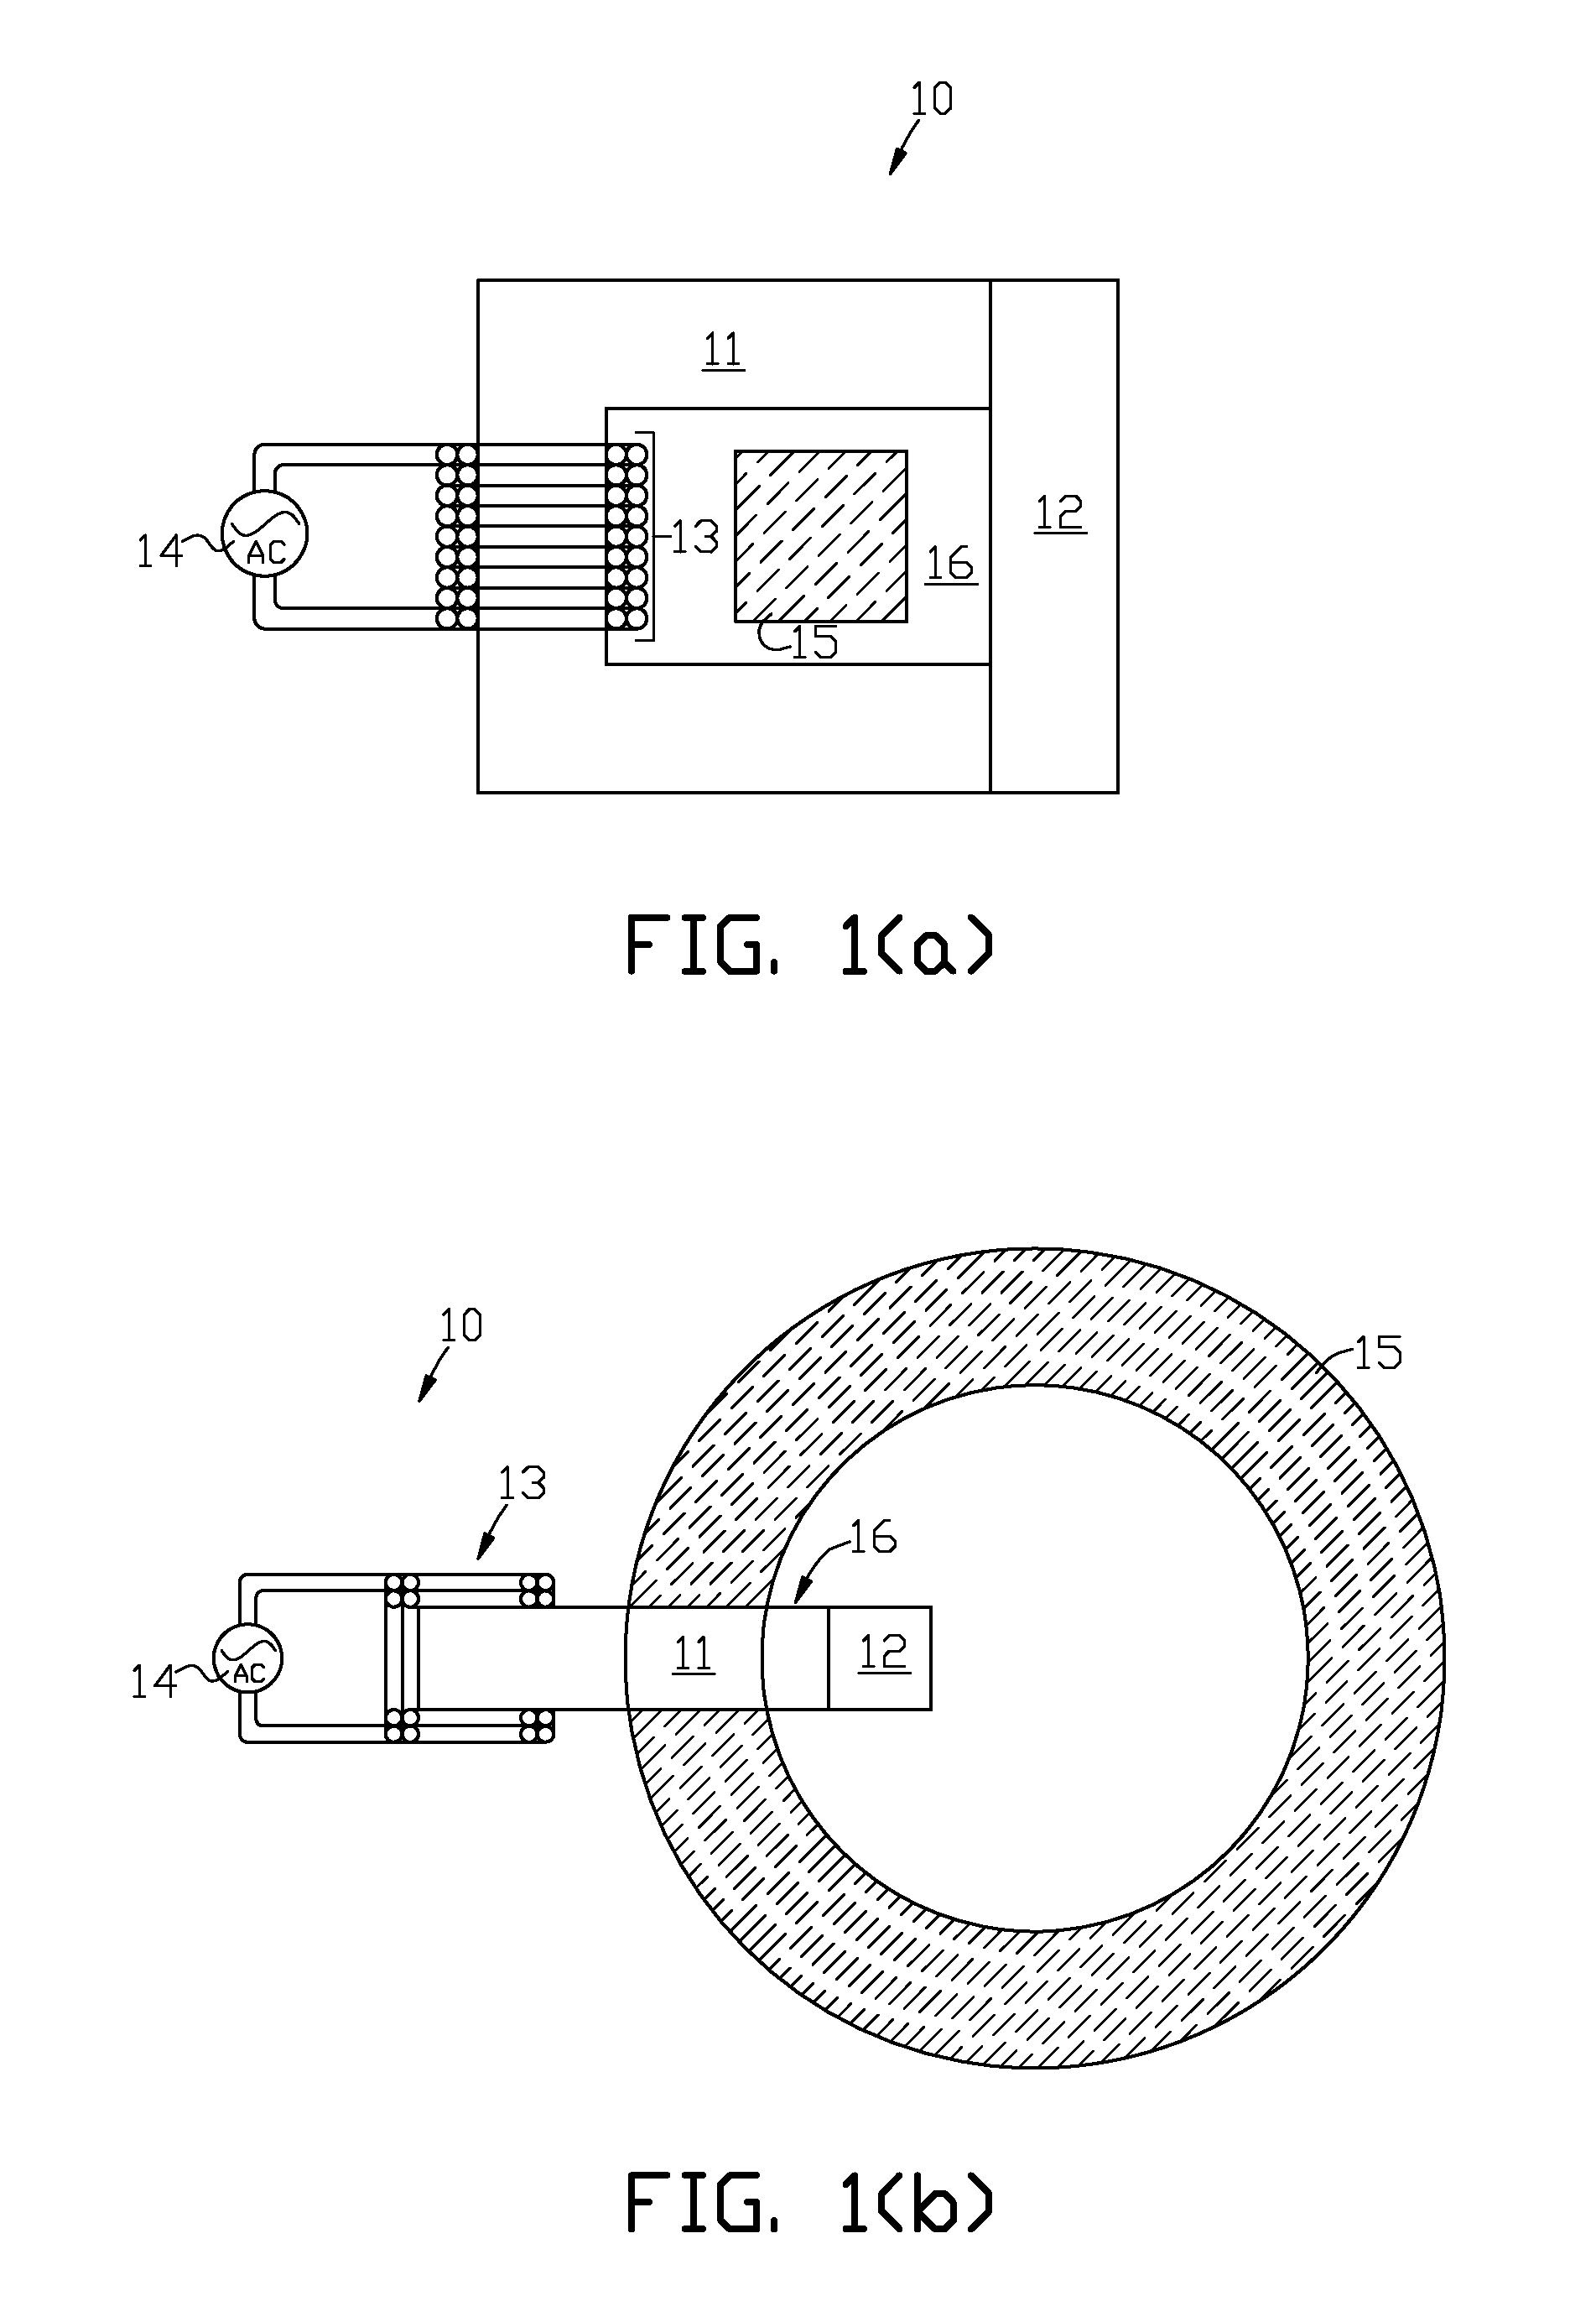 Forging of an Annular Article with Electric Induction Heating